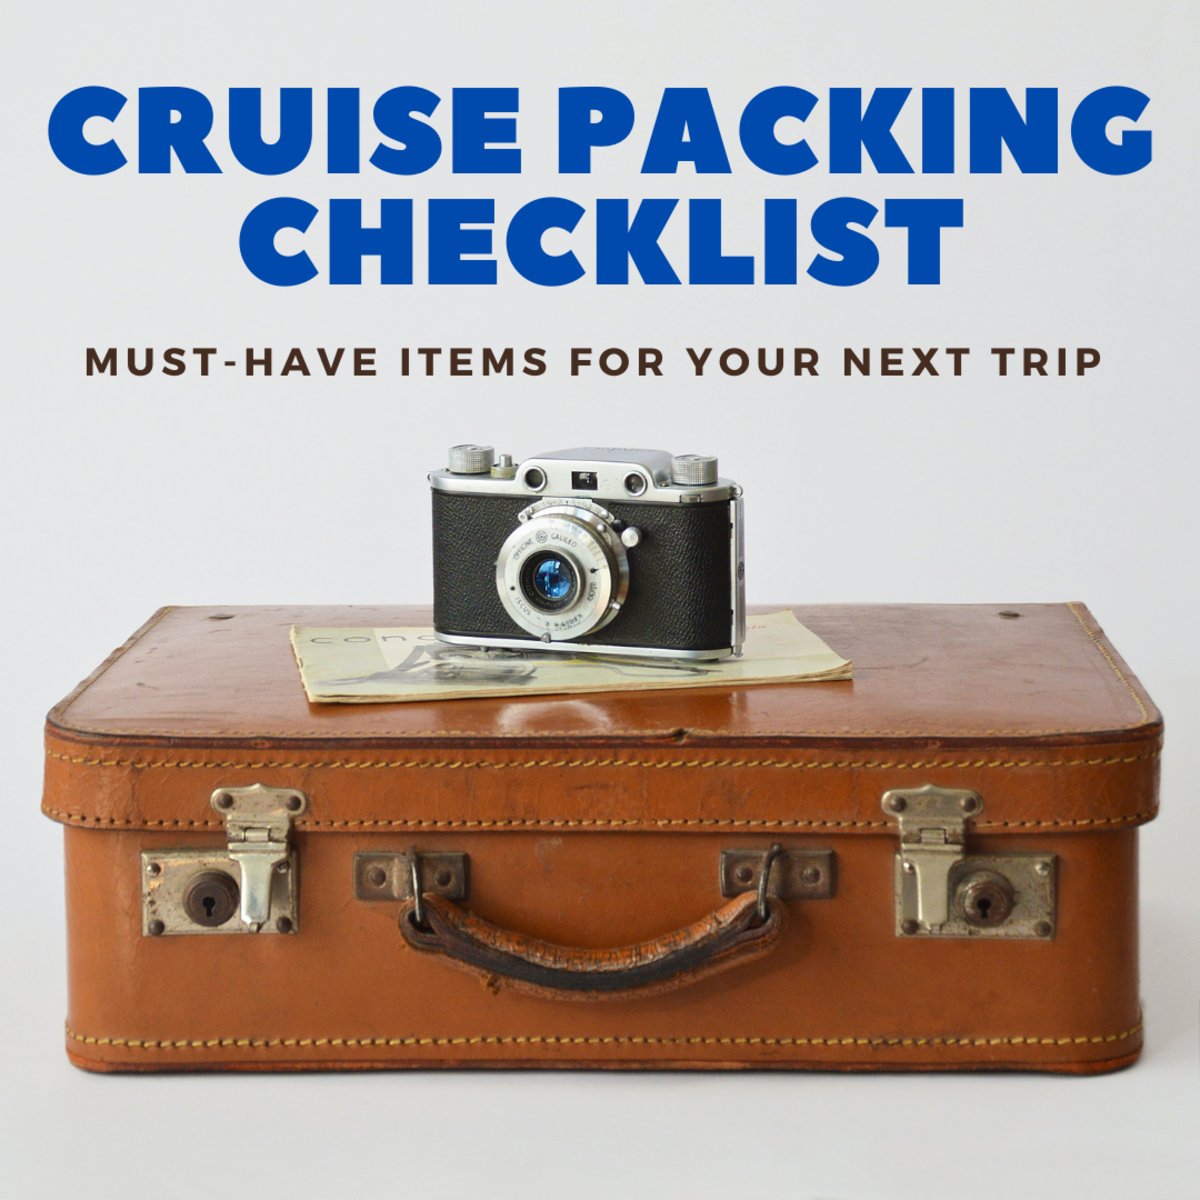 30+ Useful Things to Pack for Your Cruise - WanderWisdom